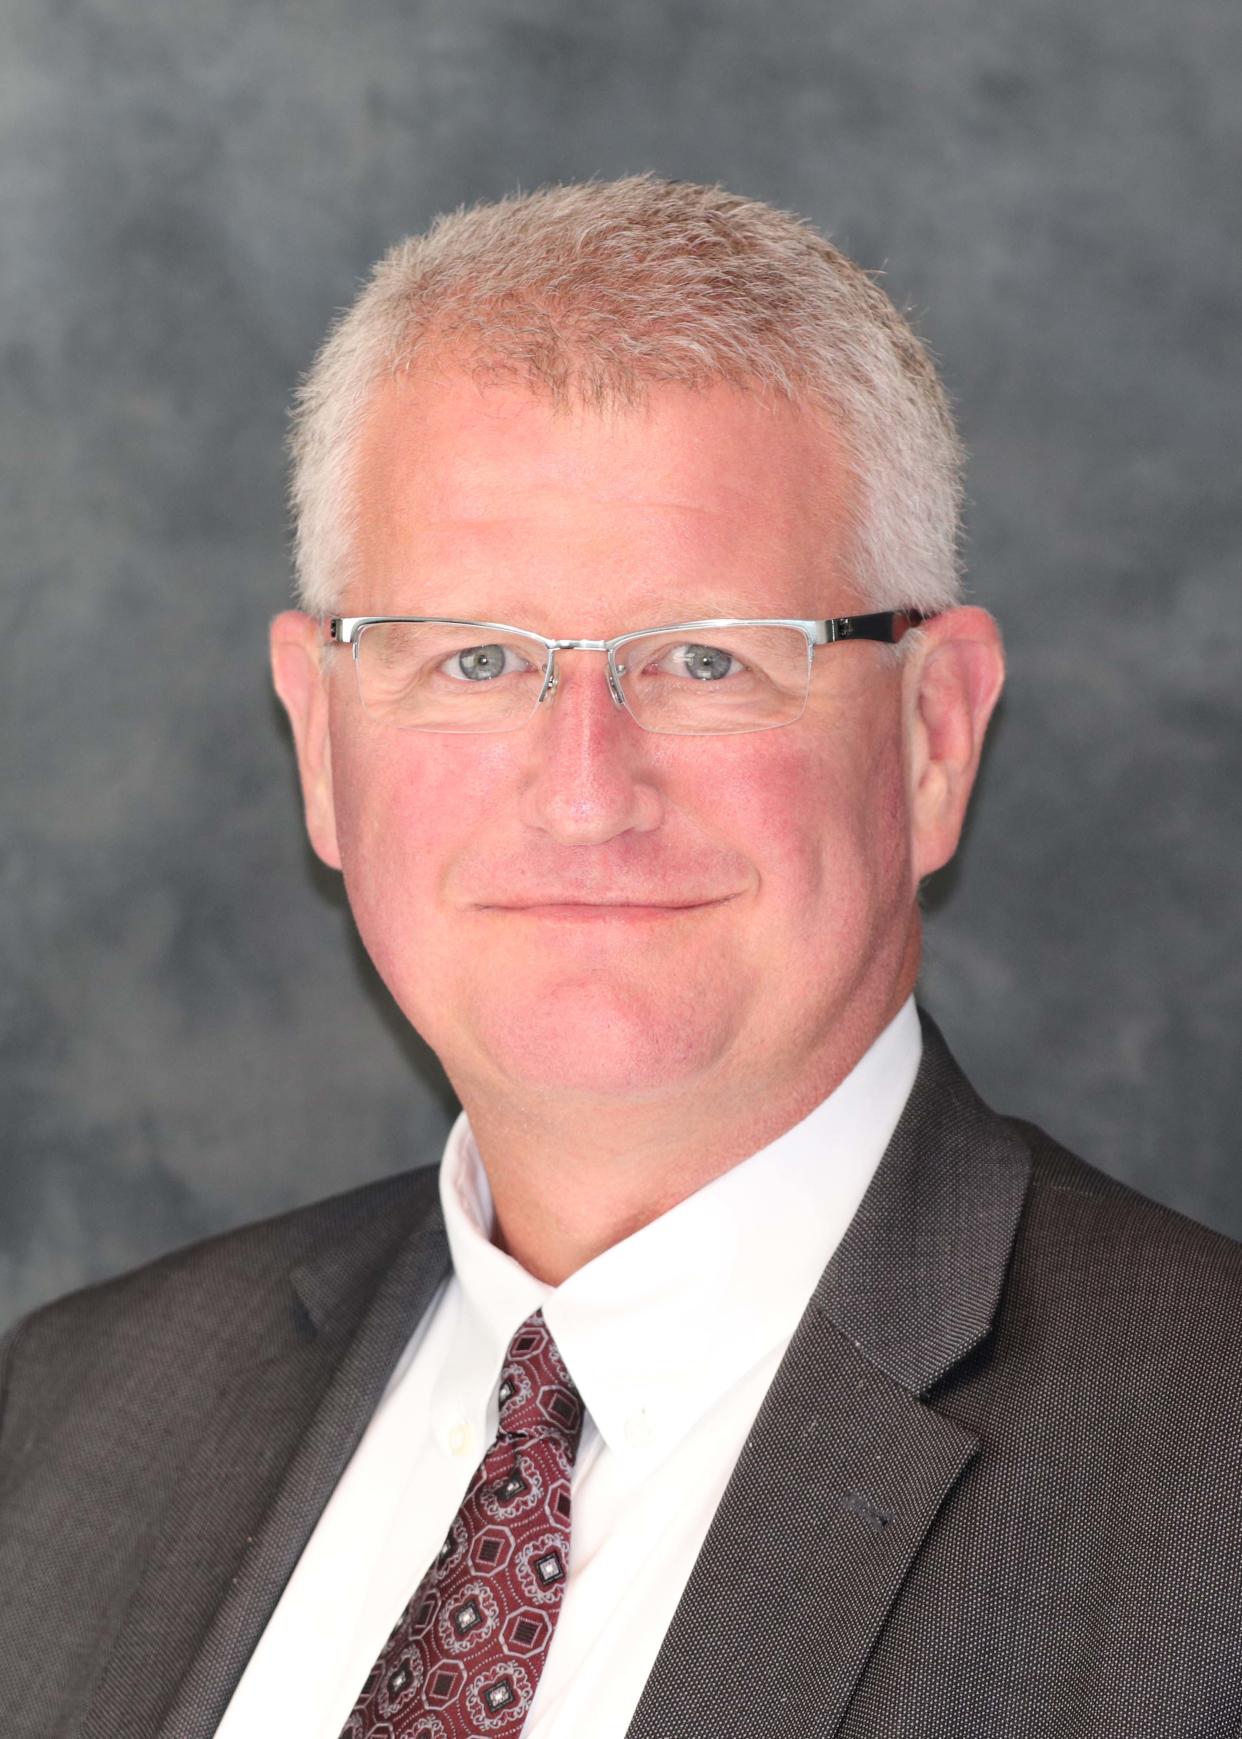 Elmbrook School District Superintendent Mark Hansen was recently named the 2024 Wisconsin Association of School District Administrators' Superintendent of the Year. He will be presented with the award in January 2024.